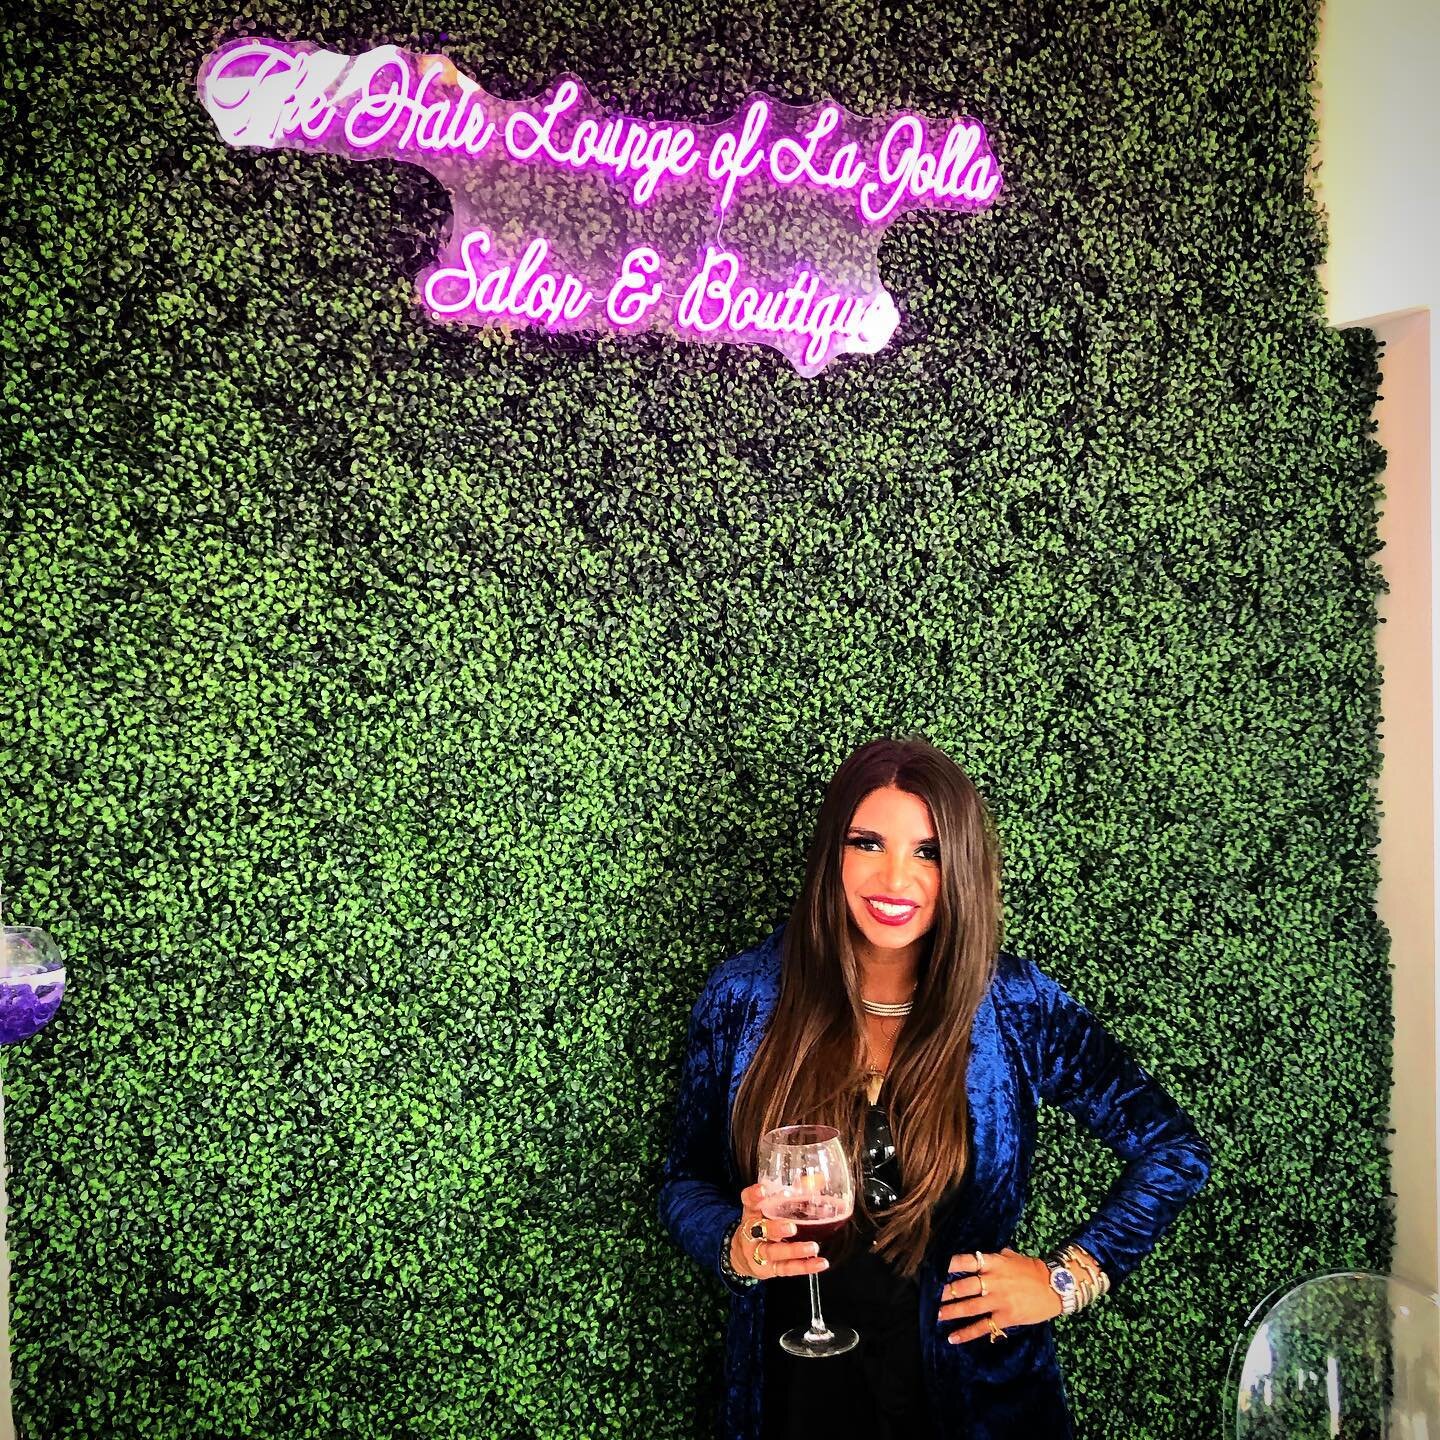 HUGE THANK YOU TO @thetashteam for taking all my wild ass ideas and making them a reality and come to fruition ! #thehairloungelajolla #framboise #selfiewall #bluevelvet #naturalhaircolor @davidyurman